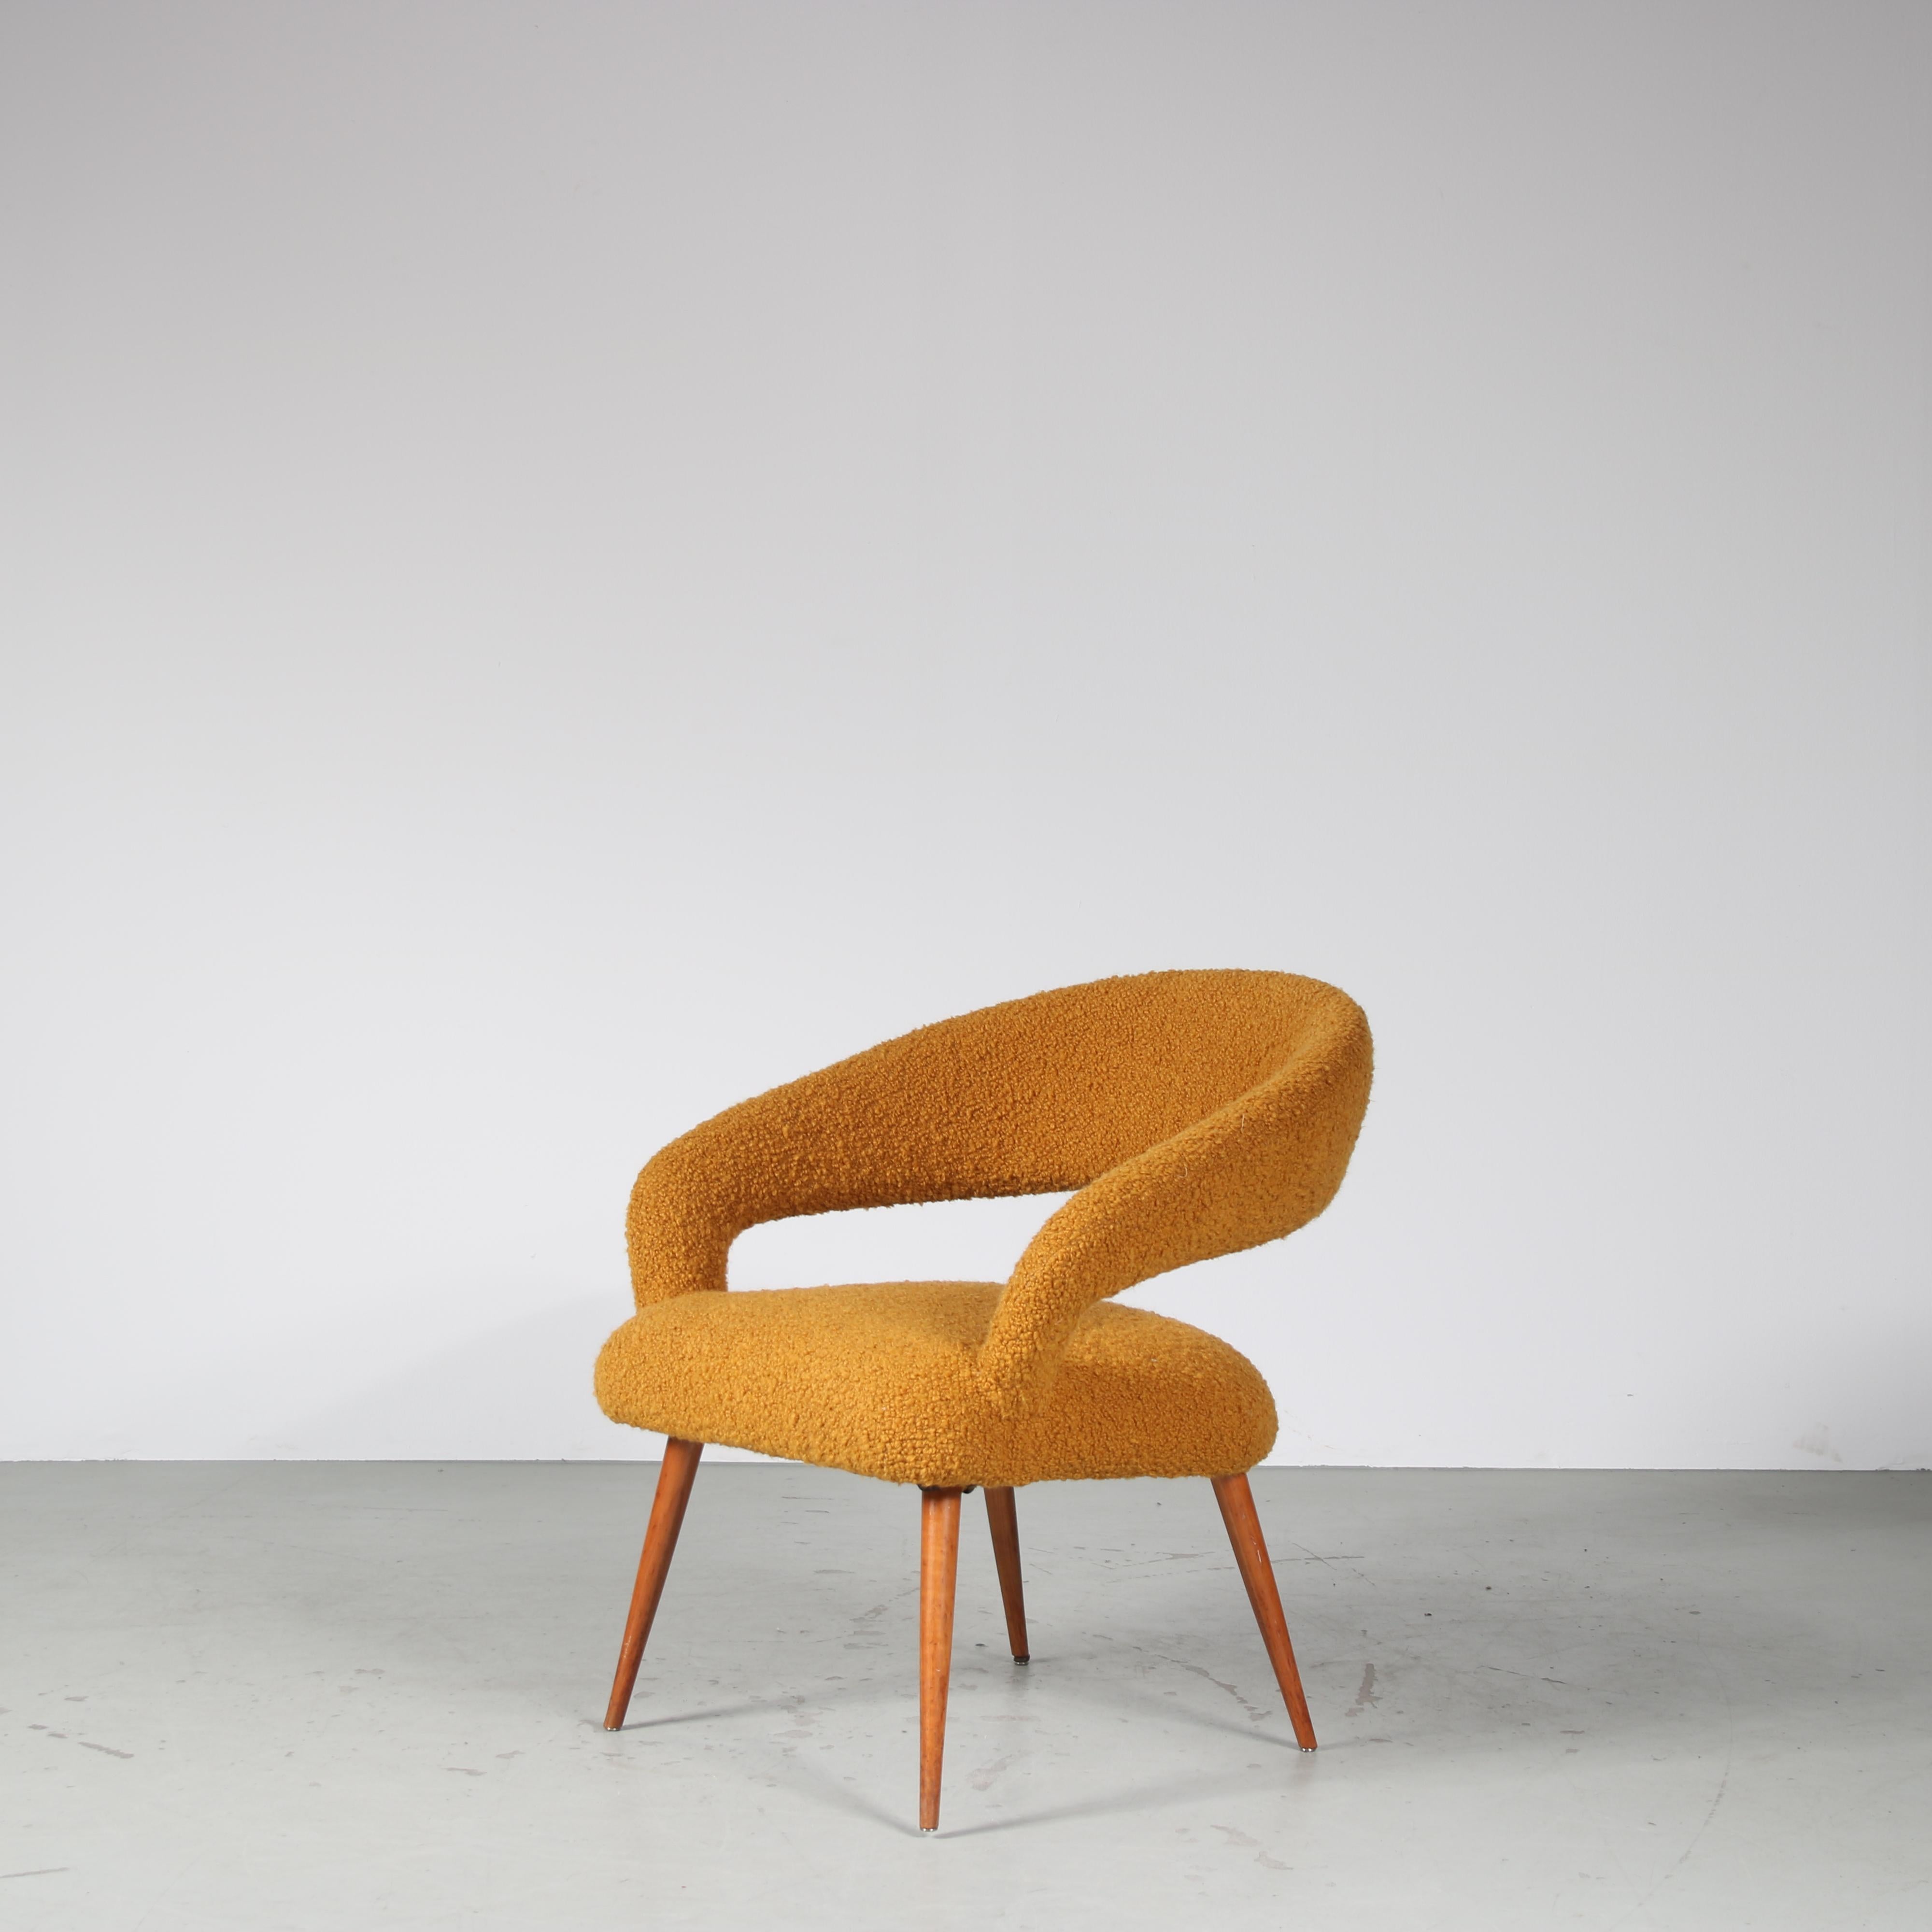 A lovely elegant easy chair, designed by Gastone Rinaldi and manufactured by RIMA in Italy around 1950.

The beautifully curved seat rests on four gently tapered wooden legs. This all adds nicely to the luxurious style of the piece, fantastically